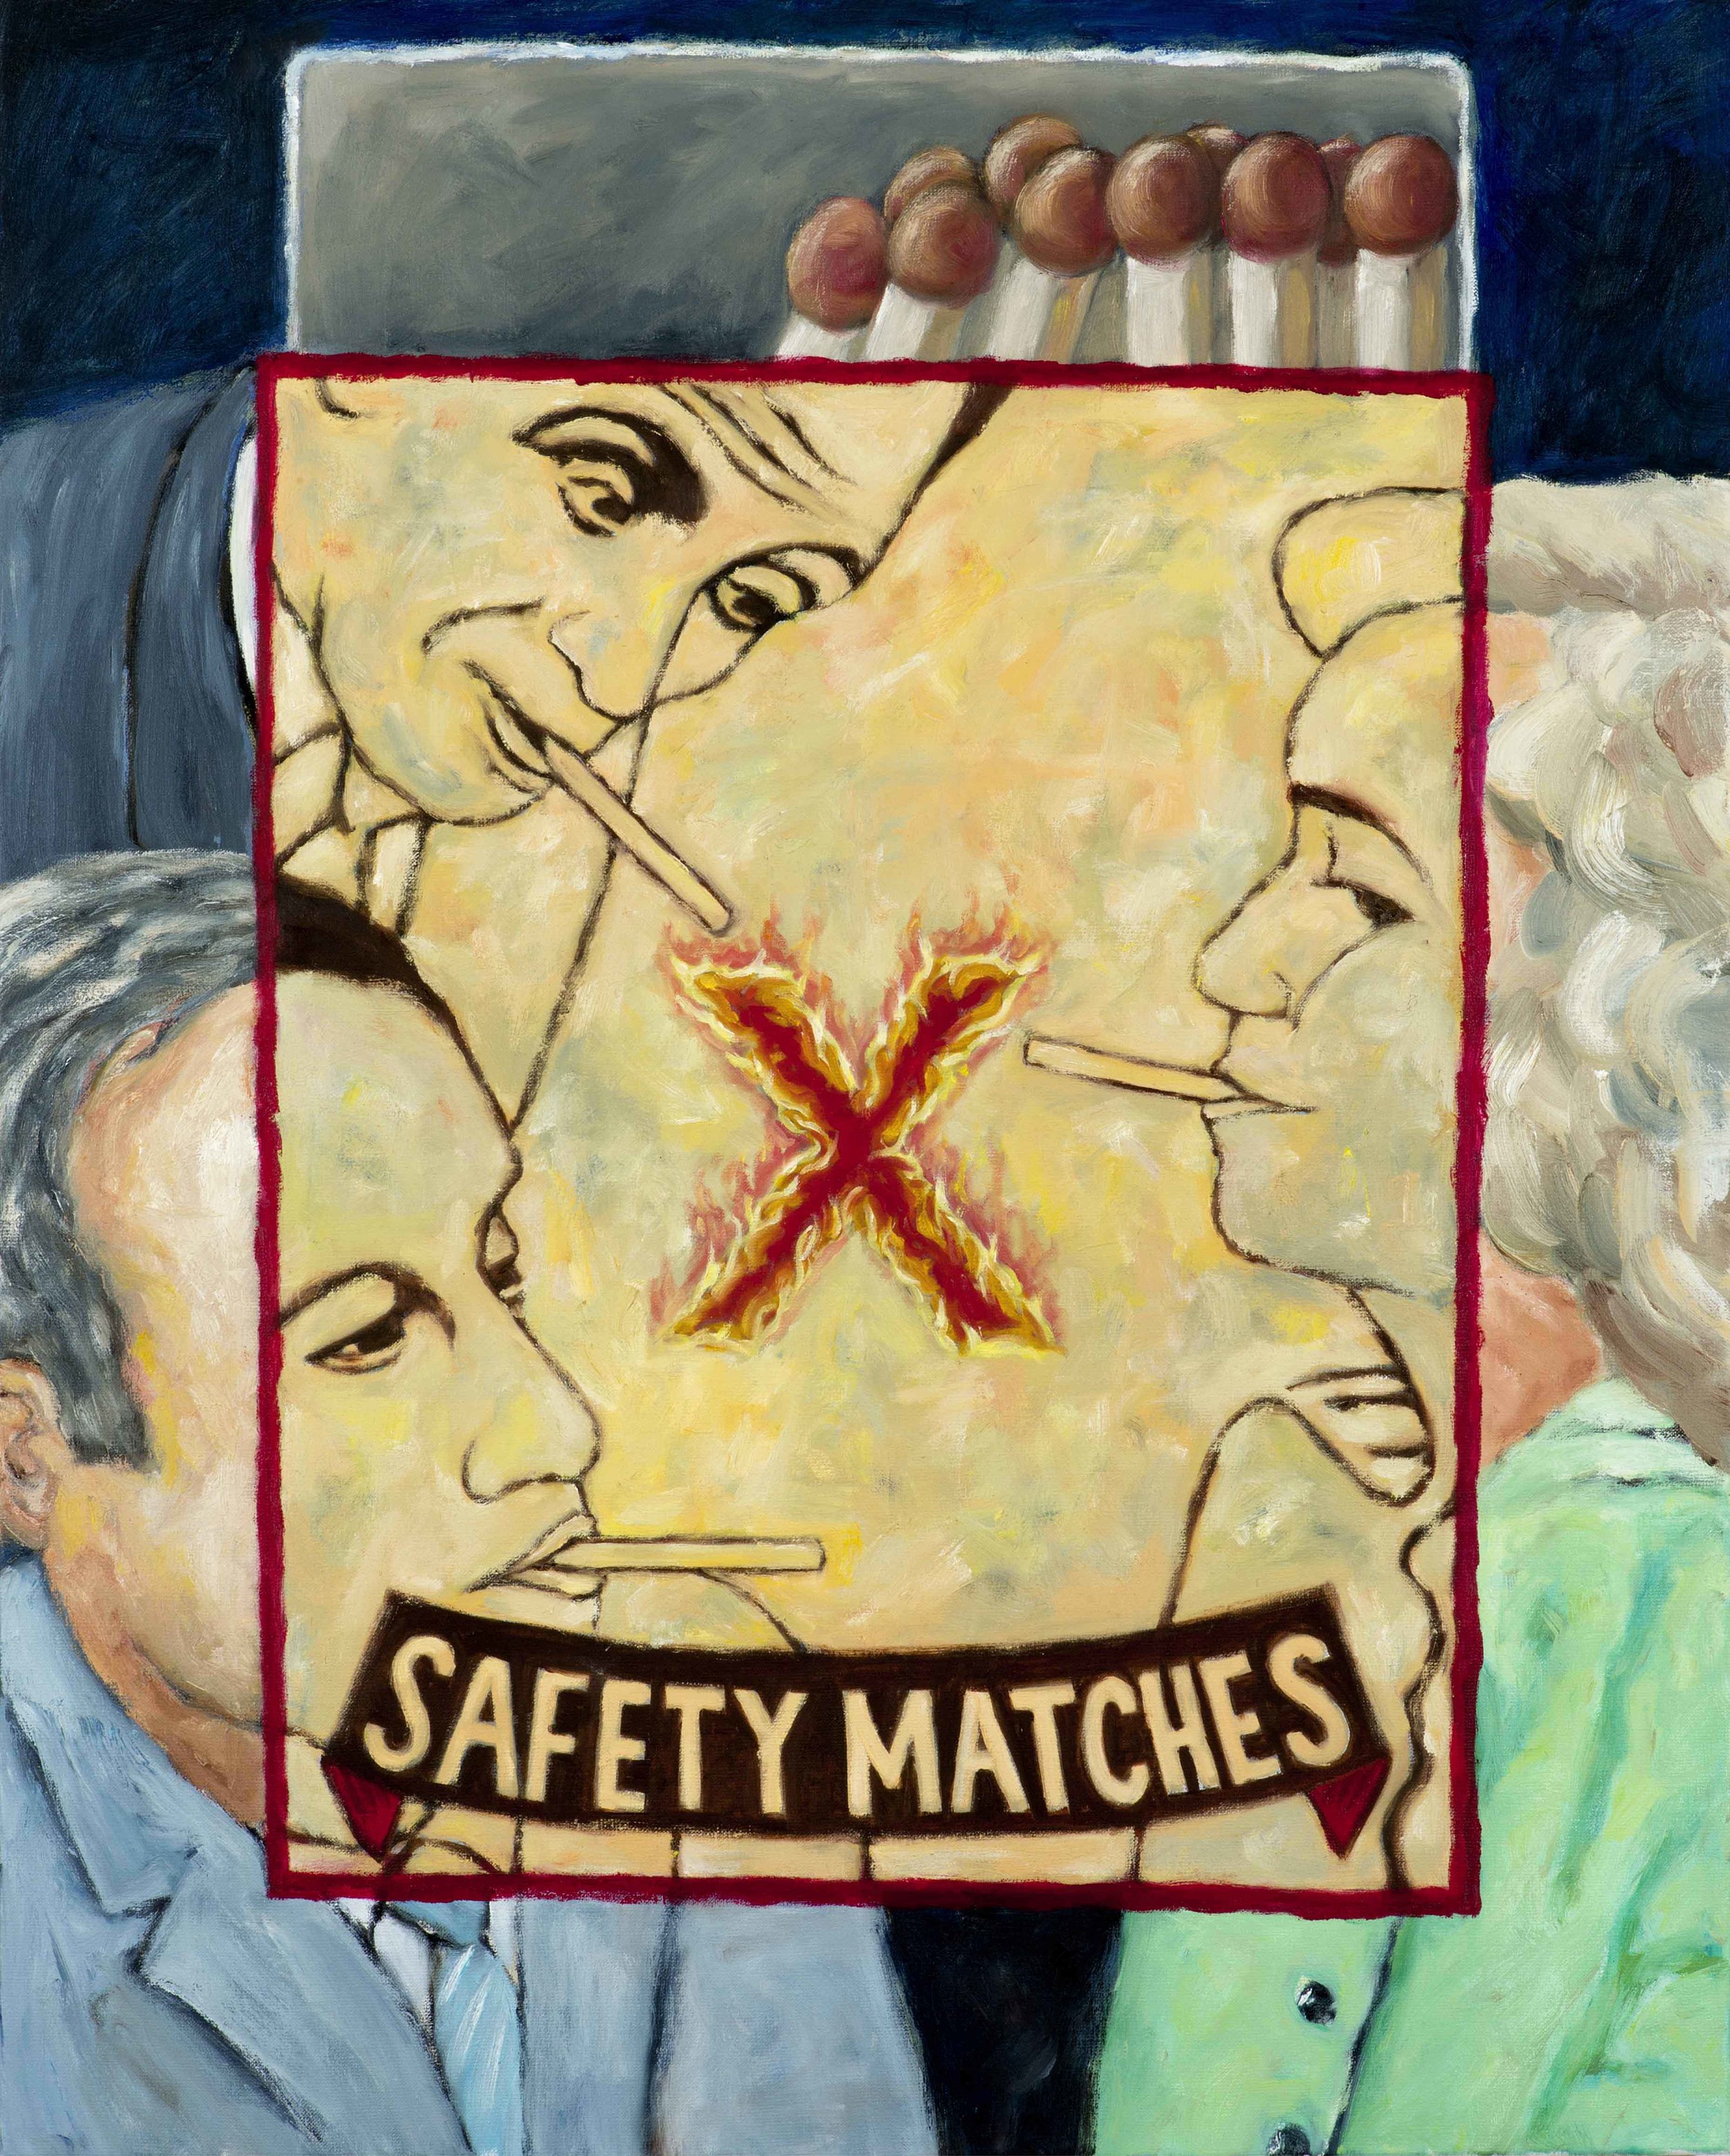   Safety matches   2017  oil on canvas  80 x 100 cm  private collection             